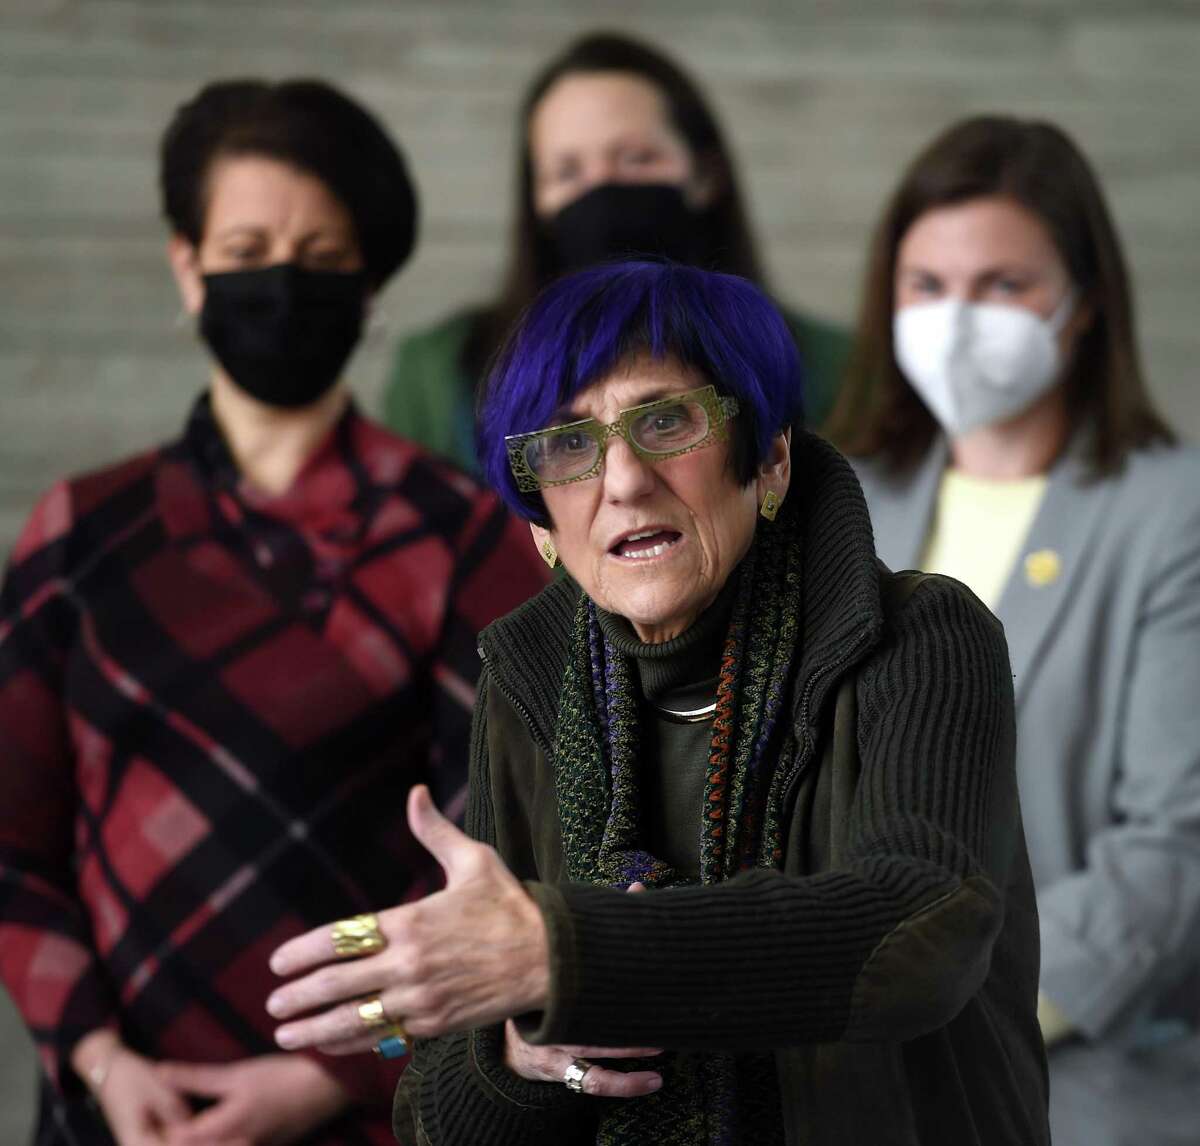 U.S. Rep. Rosa DeLauro announces the inclusion of the Southern Central Connecticut Regional Water Authority in the application process for a Water Infrastructure Finance and Innovation Act loan to rehabilitate the Lake Whitney Dam in Hamden during a press conference at the Whitney Water Purification Facility in Hamden Jan. 31, 2022.